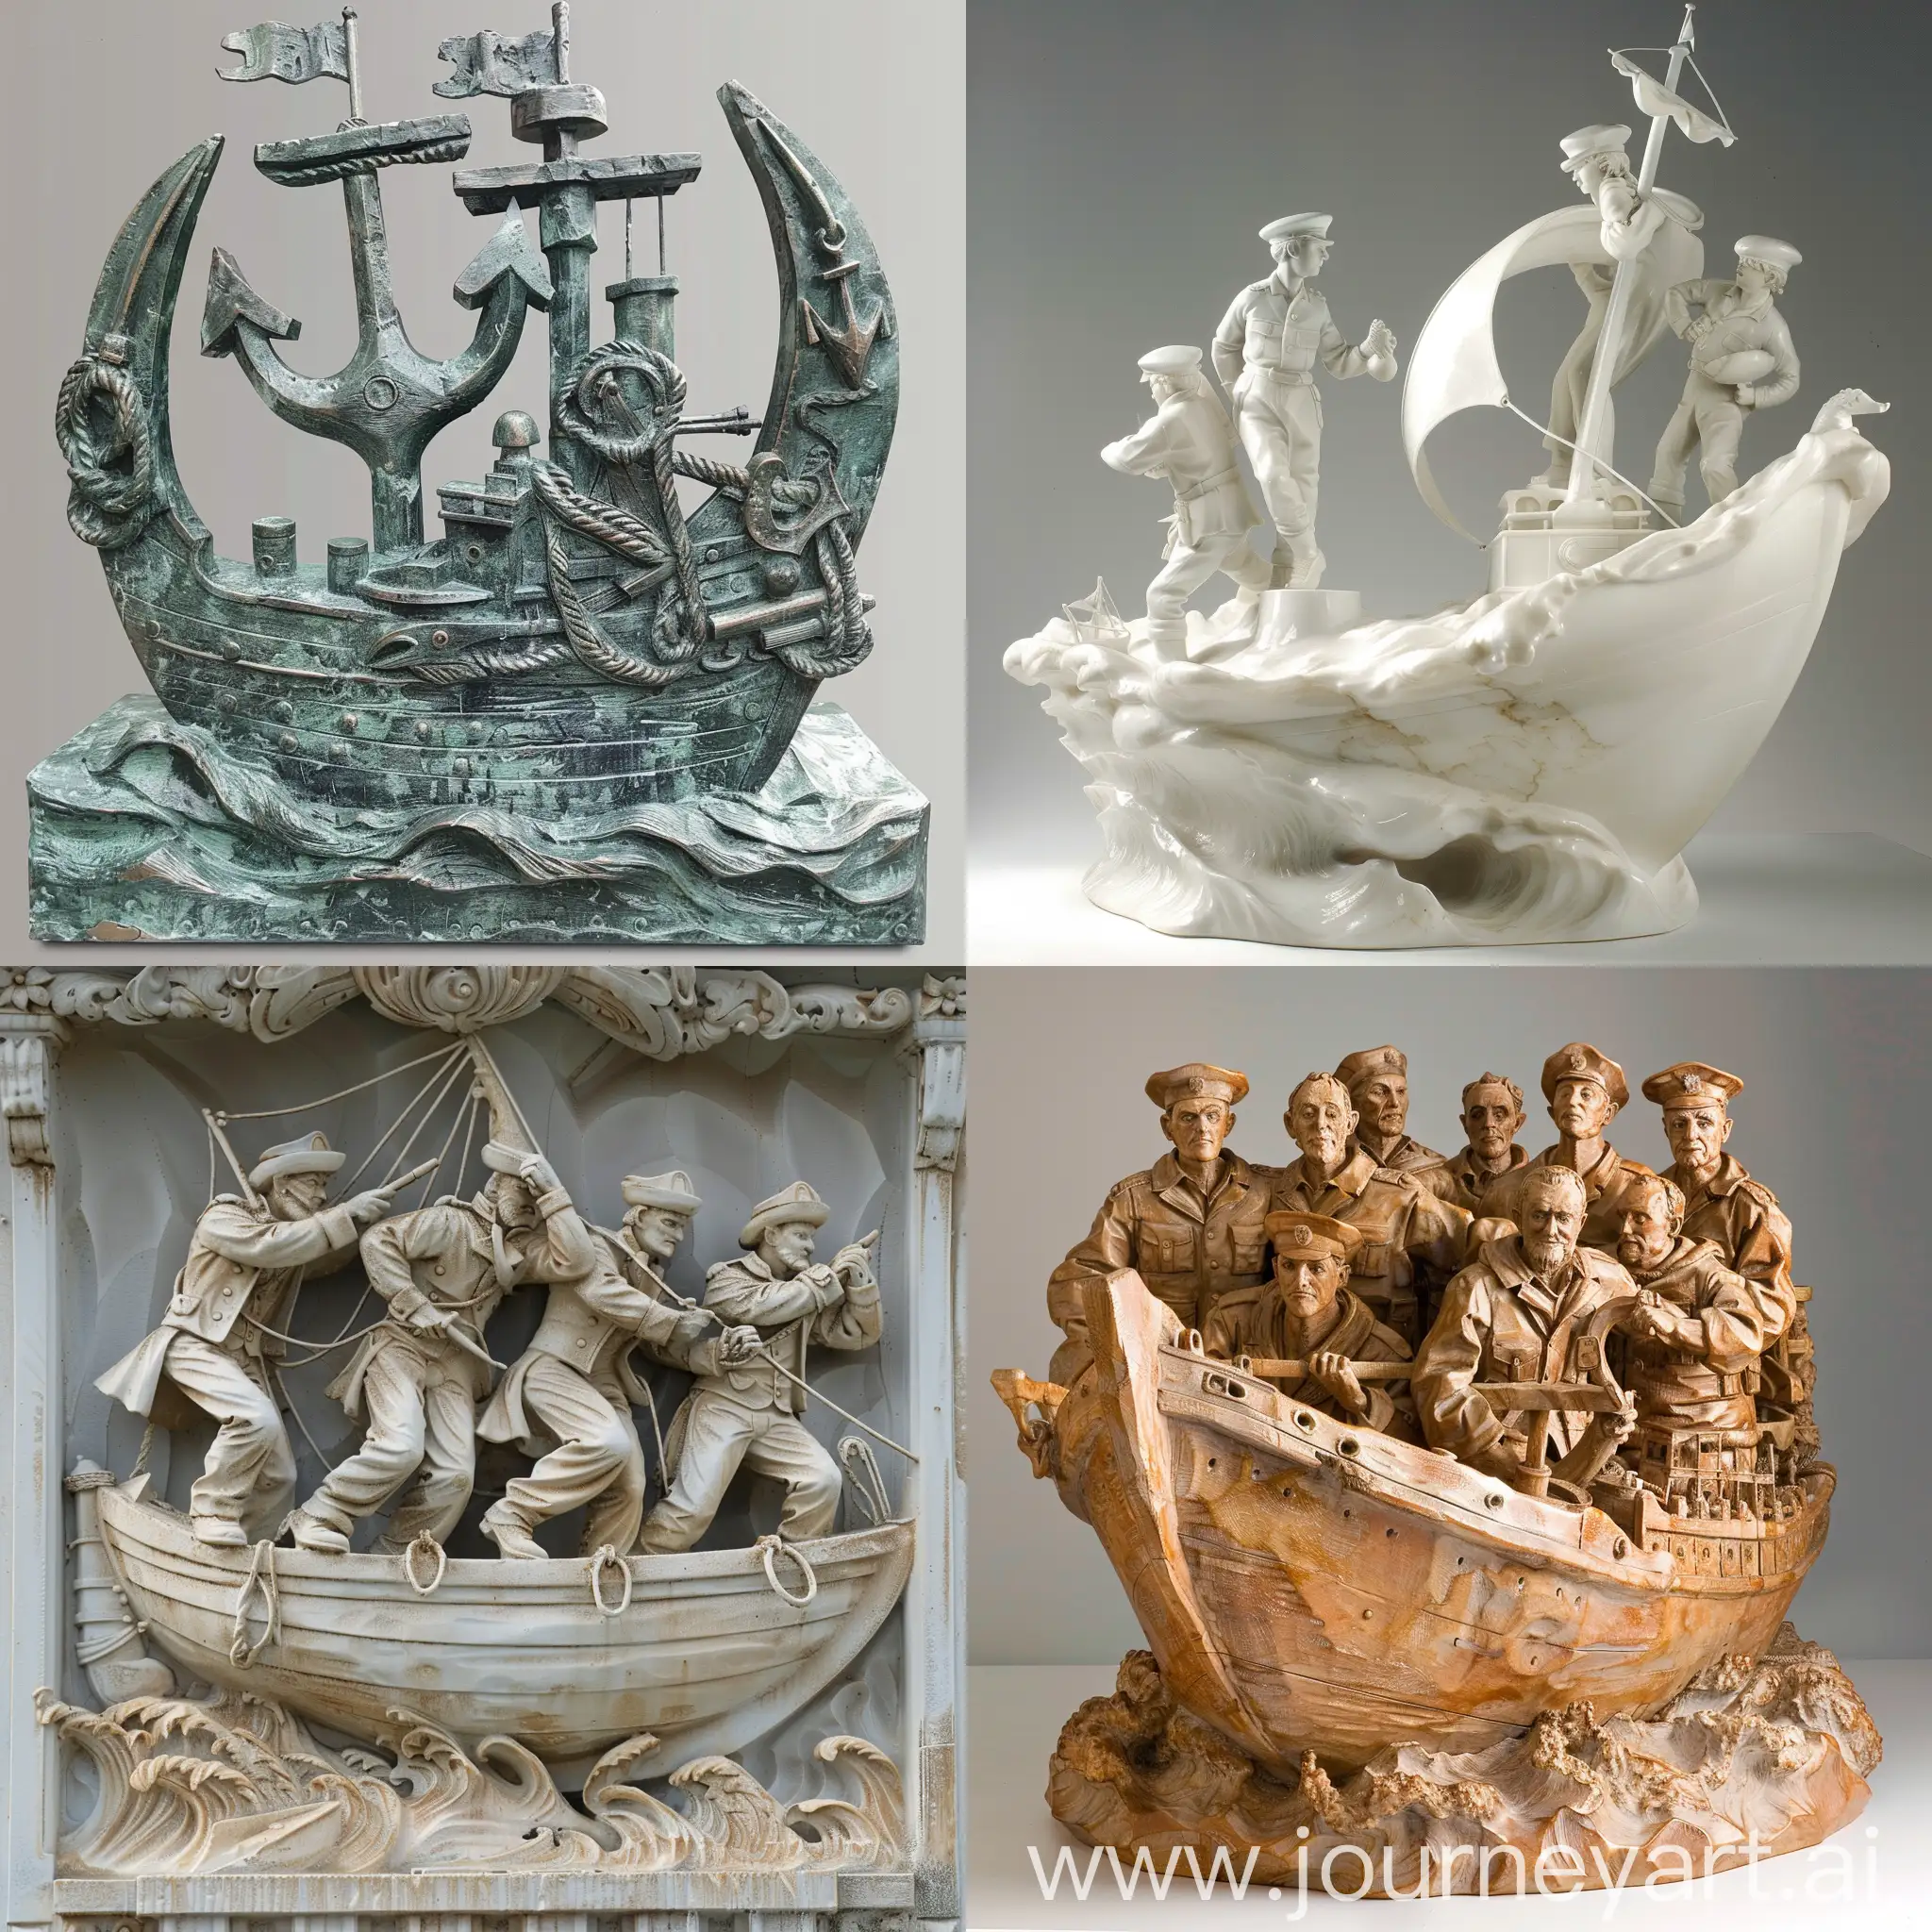 NavalThemed-Integrity-Culture-Sculpture-Symbol-of-Honor-and-Tradition